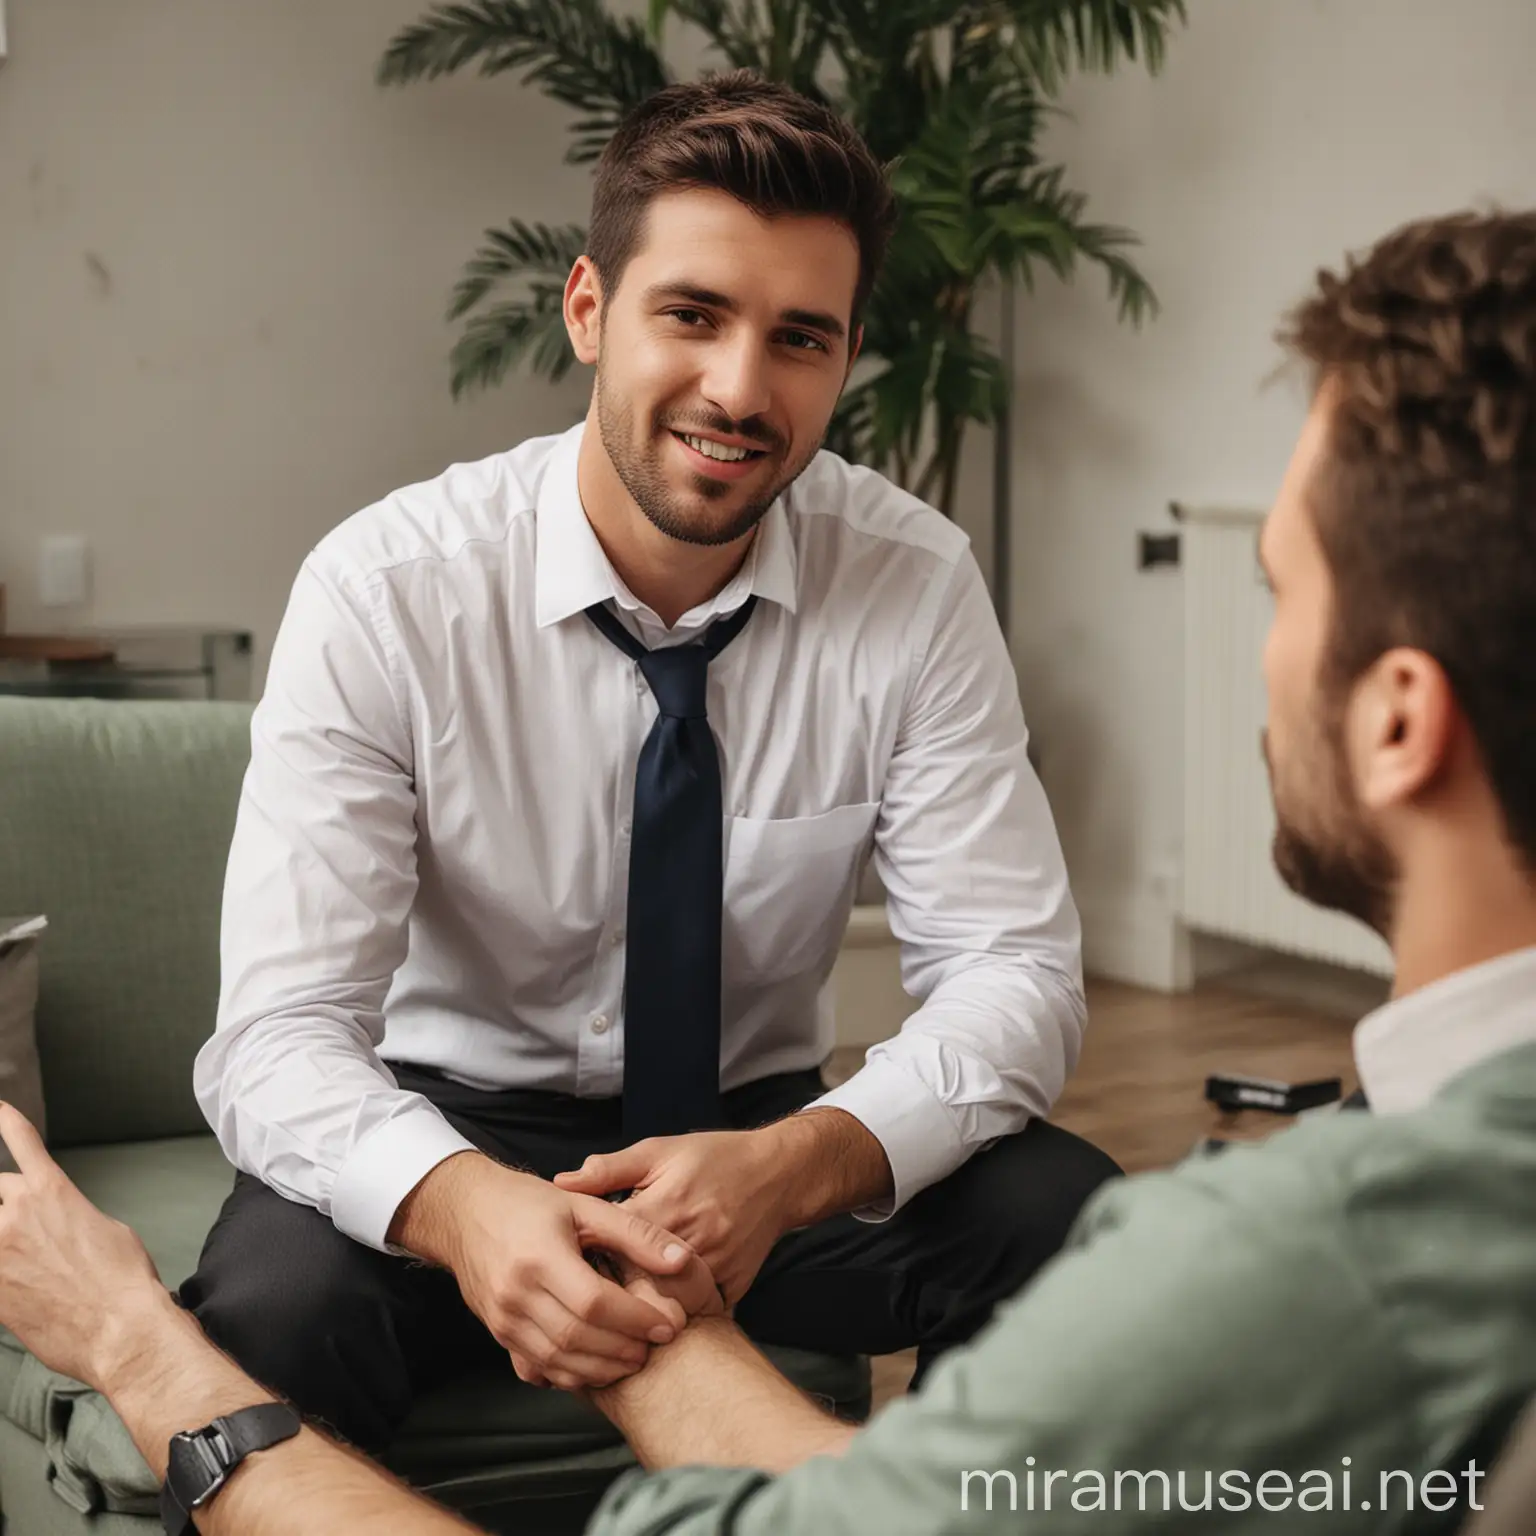 A man taking a break from work and talking to a therapist